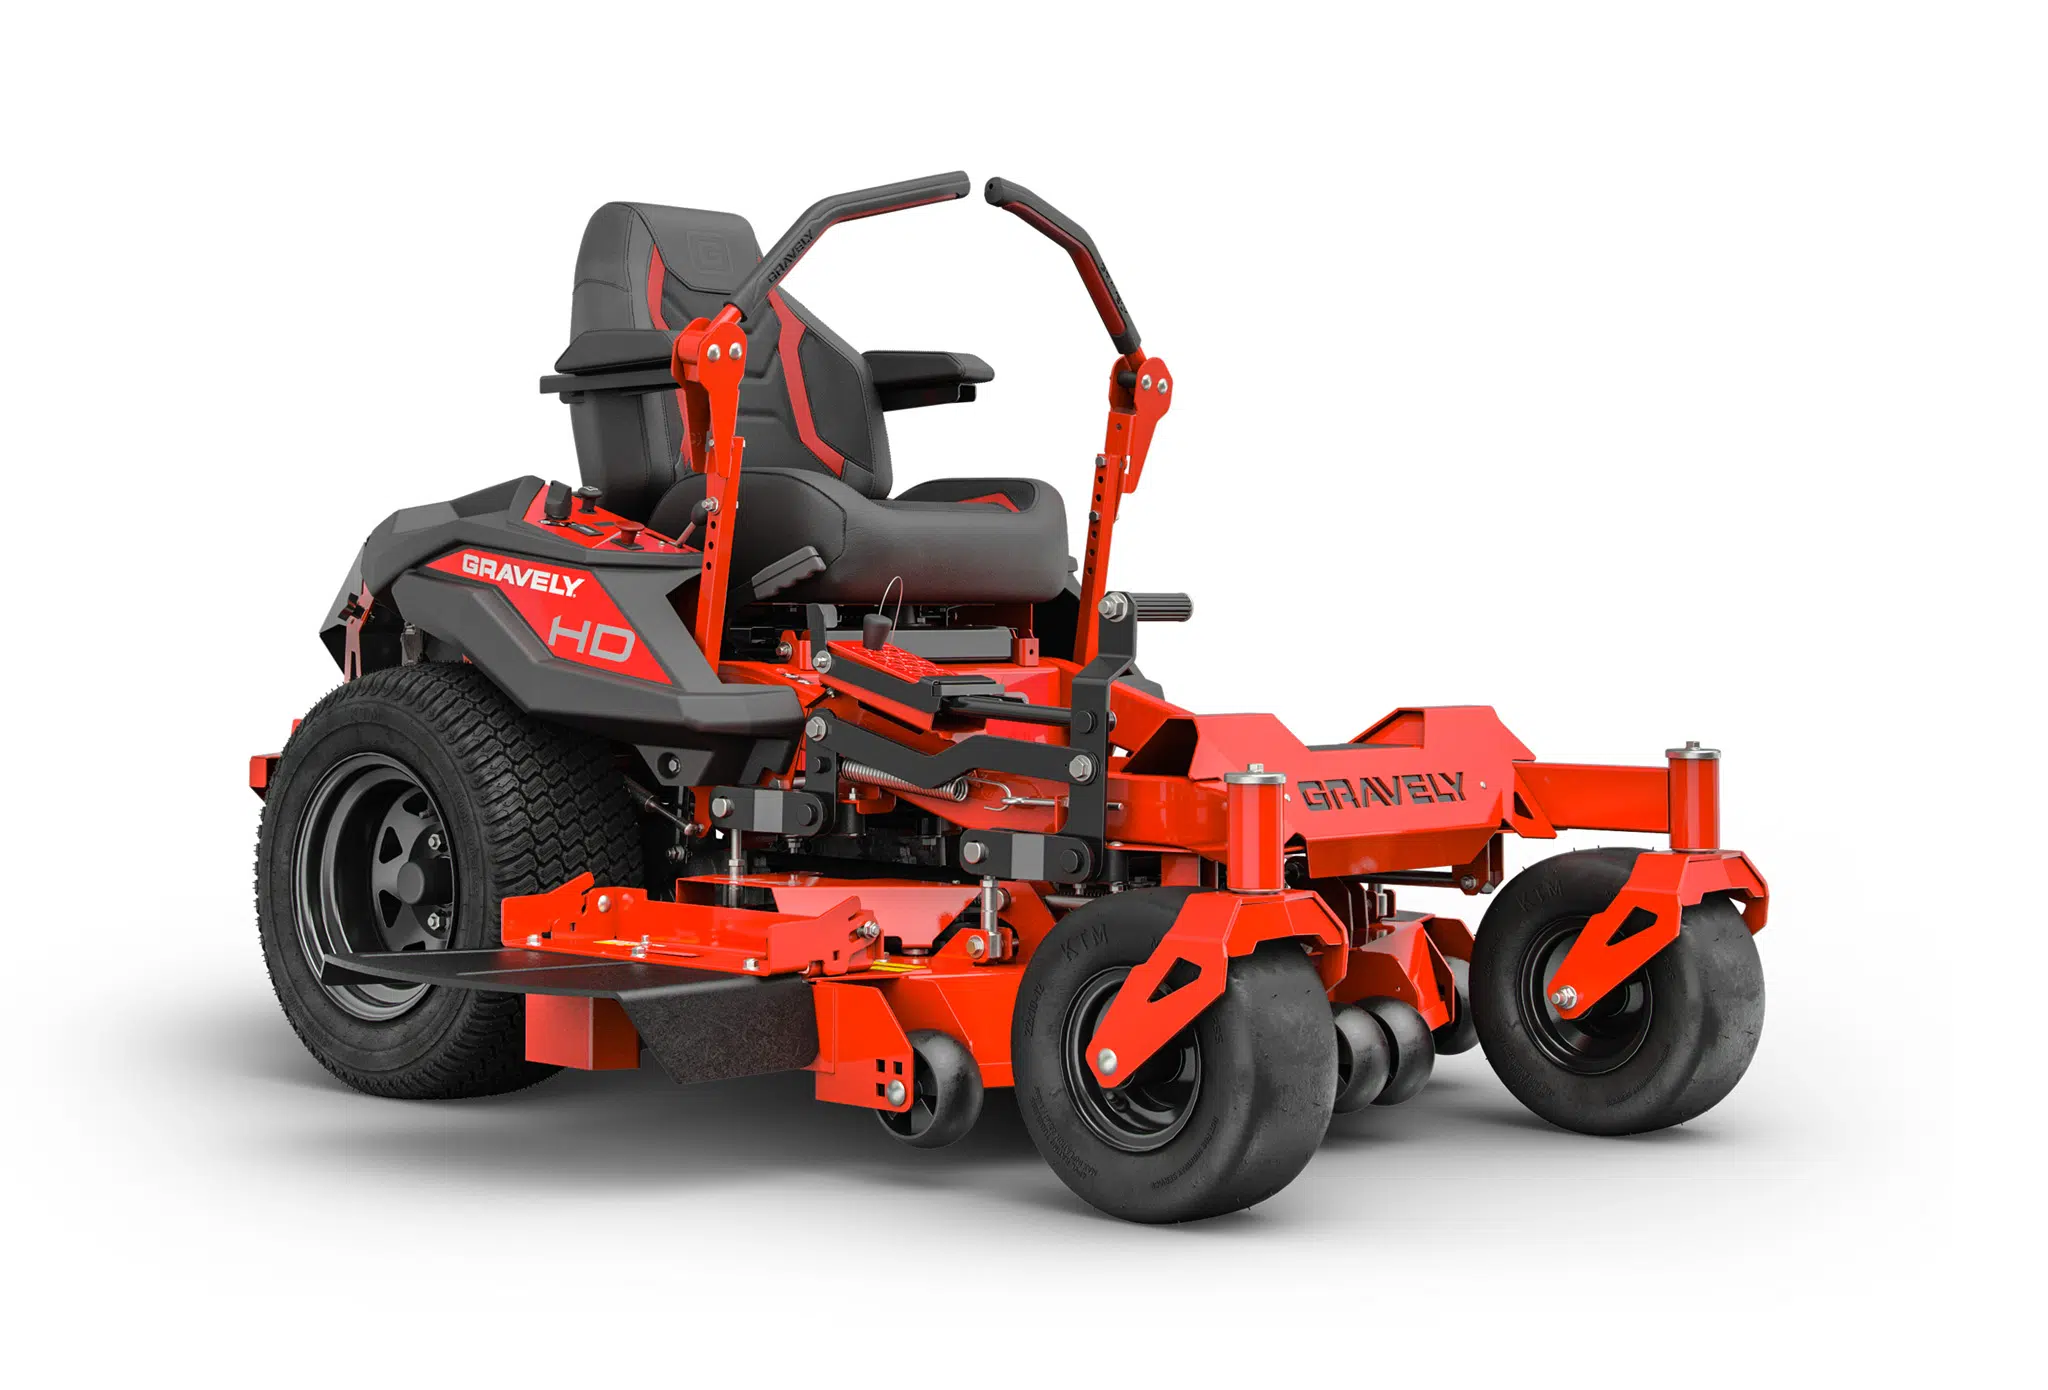 Gravely HD Lawn Mower from L&M Sales and Service in Knoxville TN